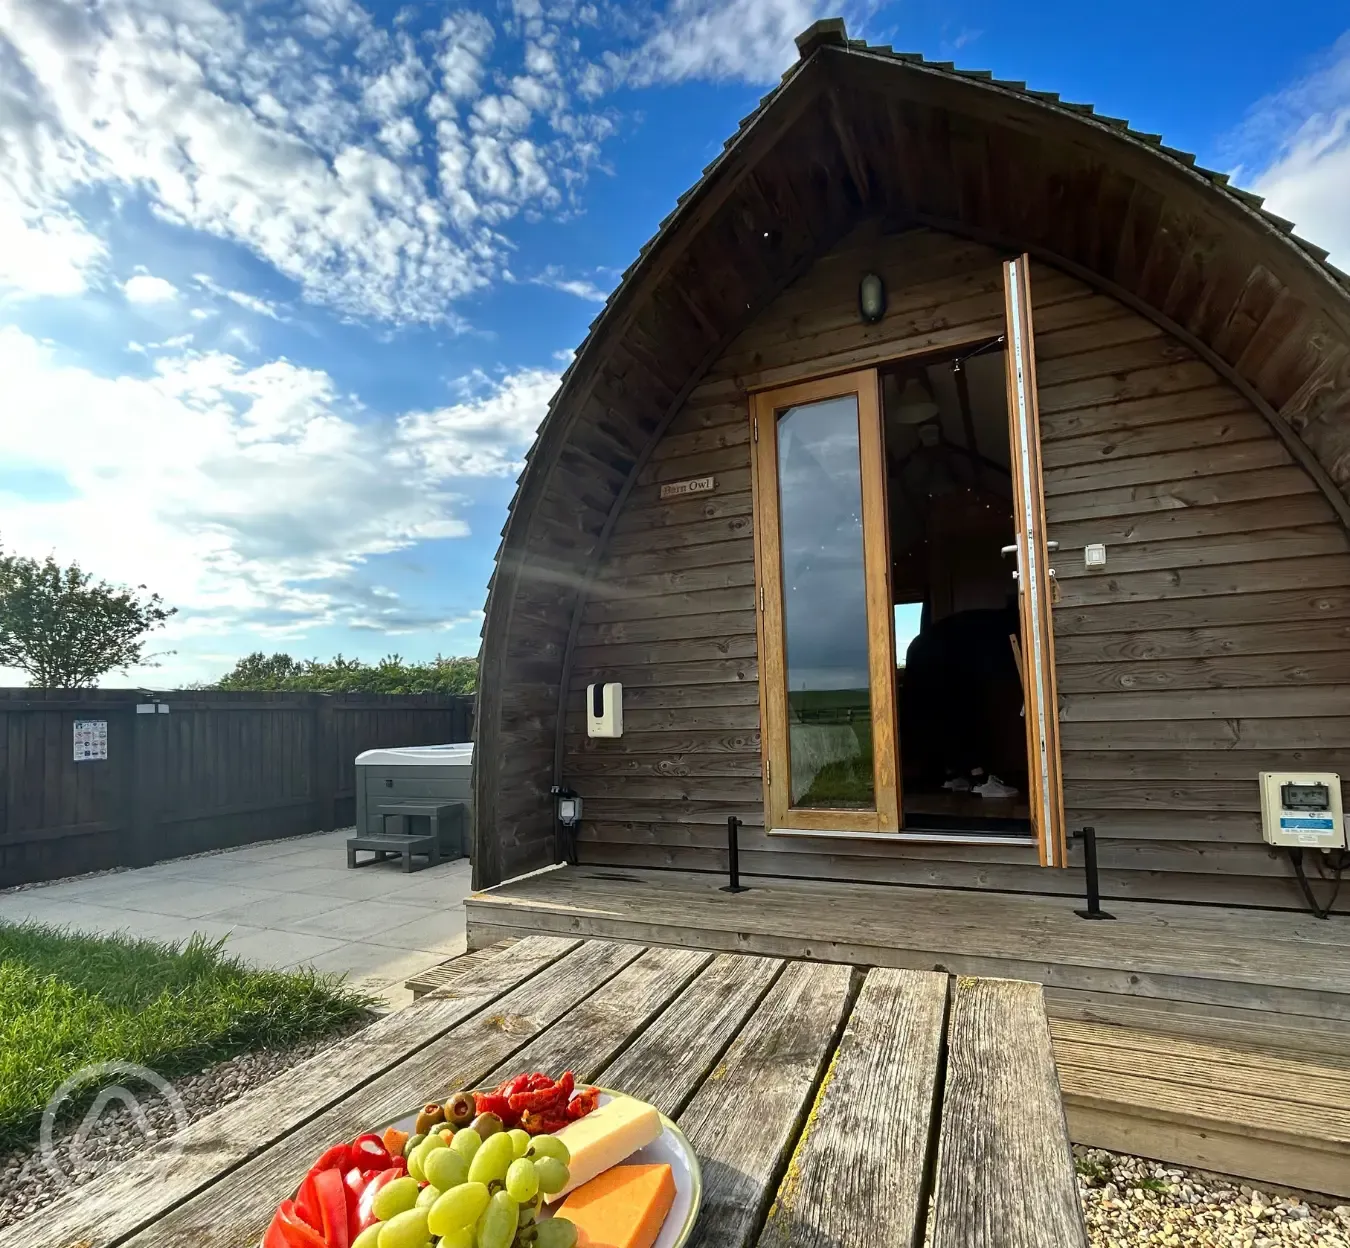 Ensuite deluxe Wigwam pod with hot tub